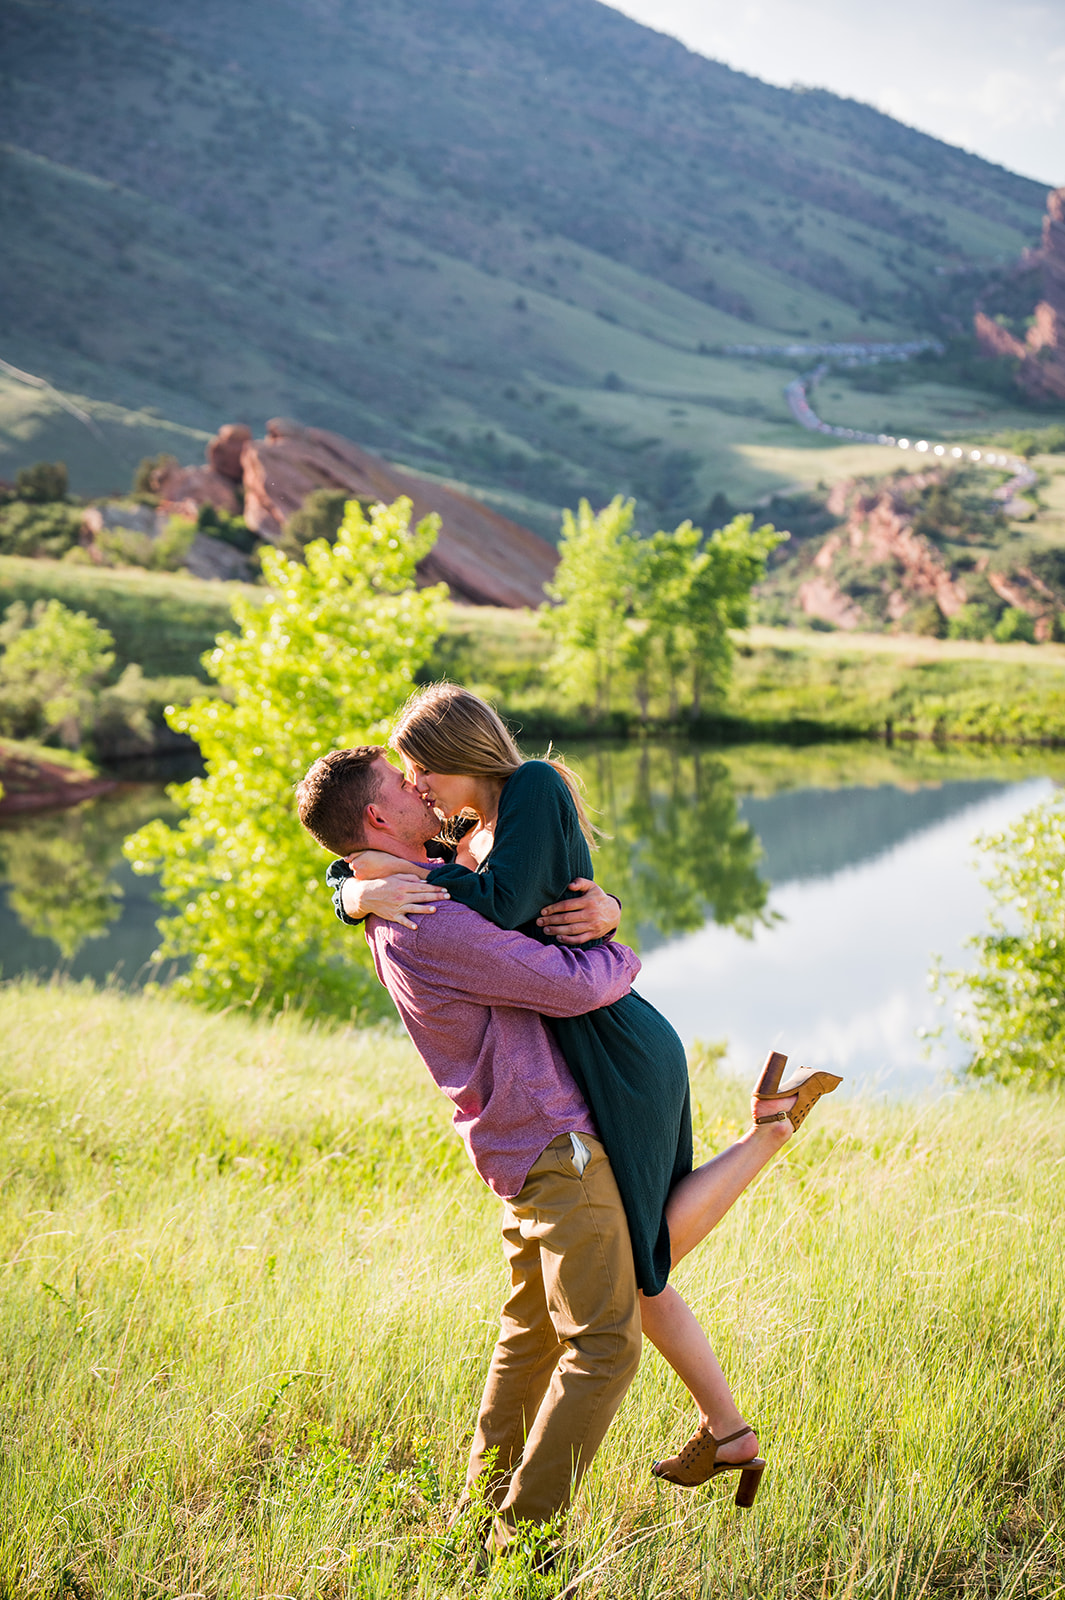 Mount falcon summer engagement session. Glowy sun and dog engagement session. Sunset engagement session in denver